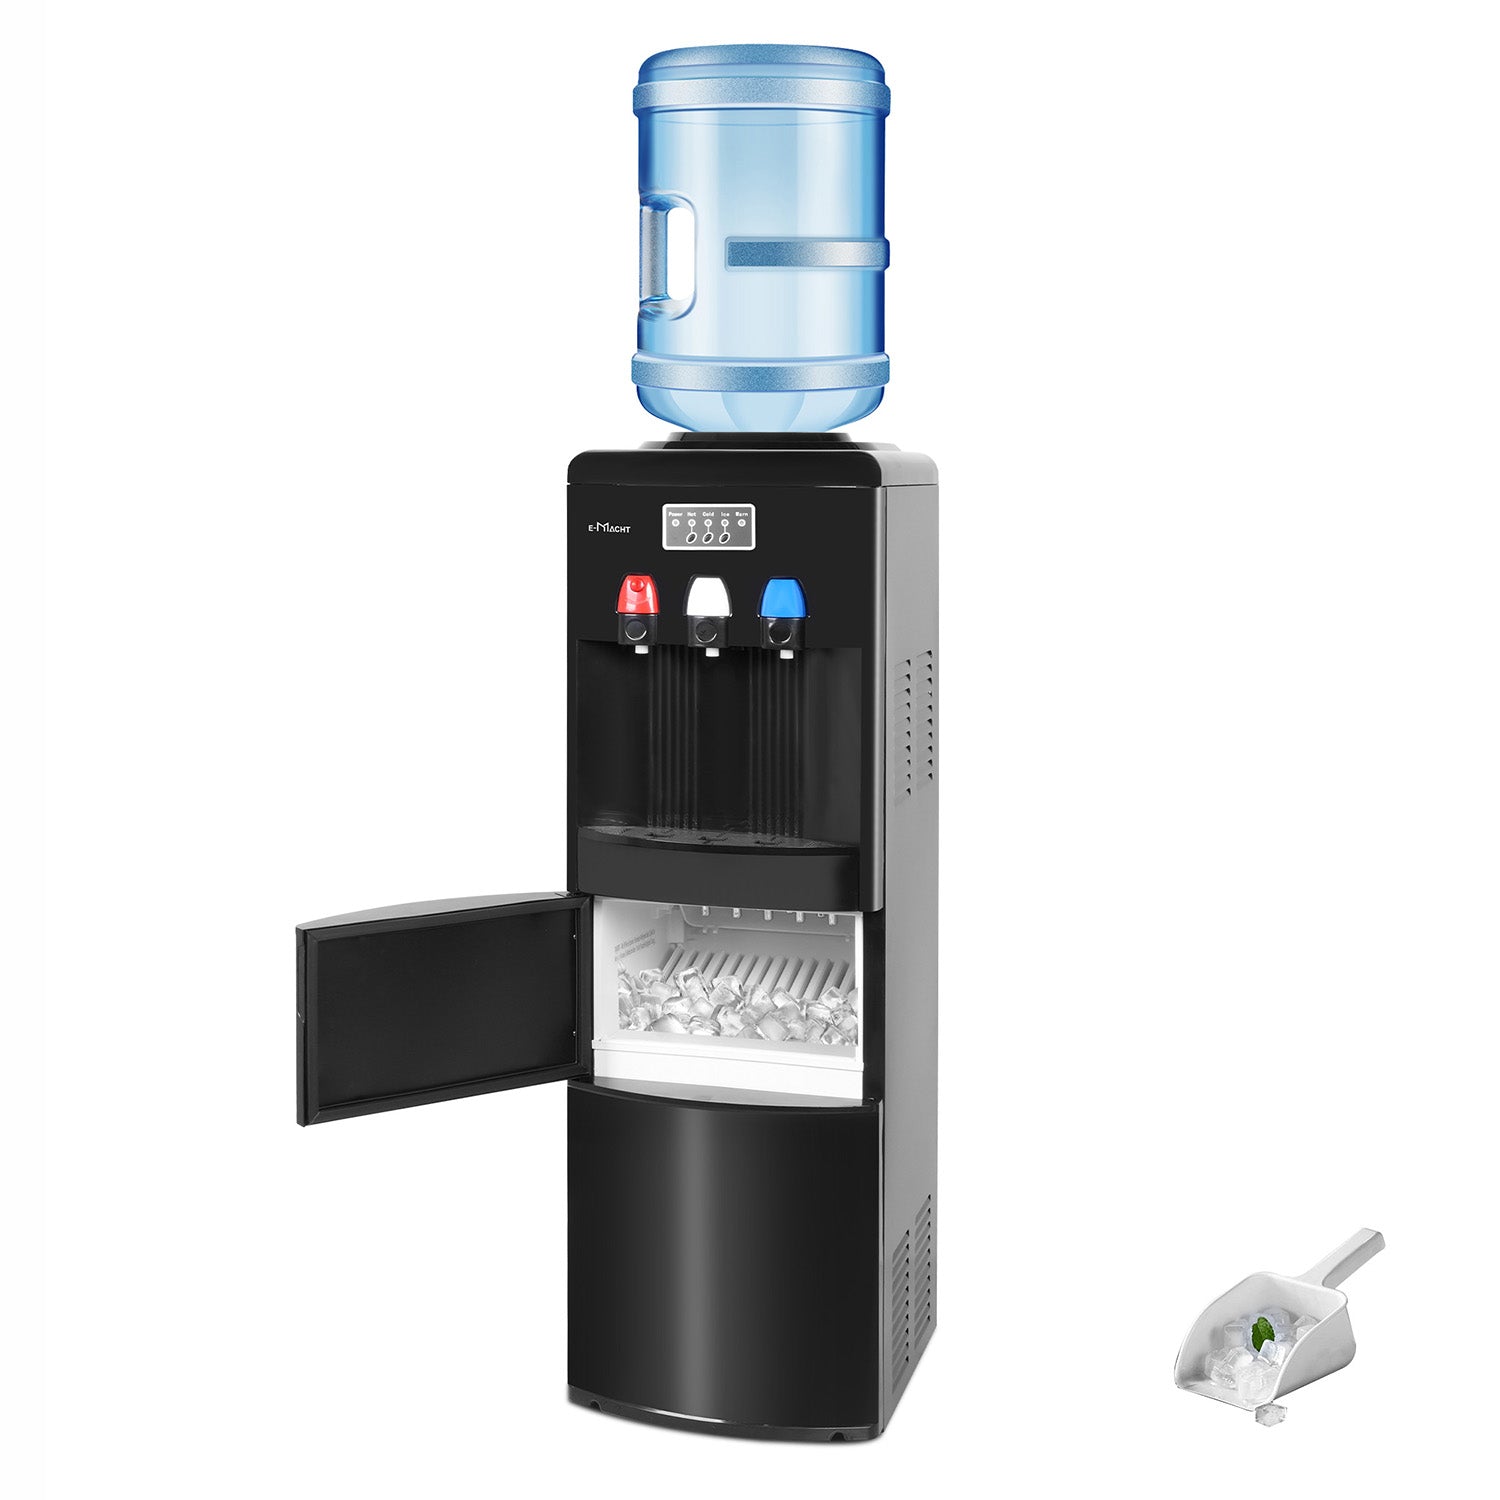 2 in 1 Water Cooler Dispenser for 3-5 Gallon Bottle with Scoop, Ice Maker, Child Safety Lock, Black(Re-stocking soon)